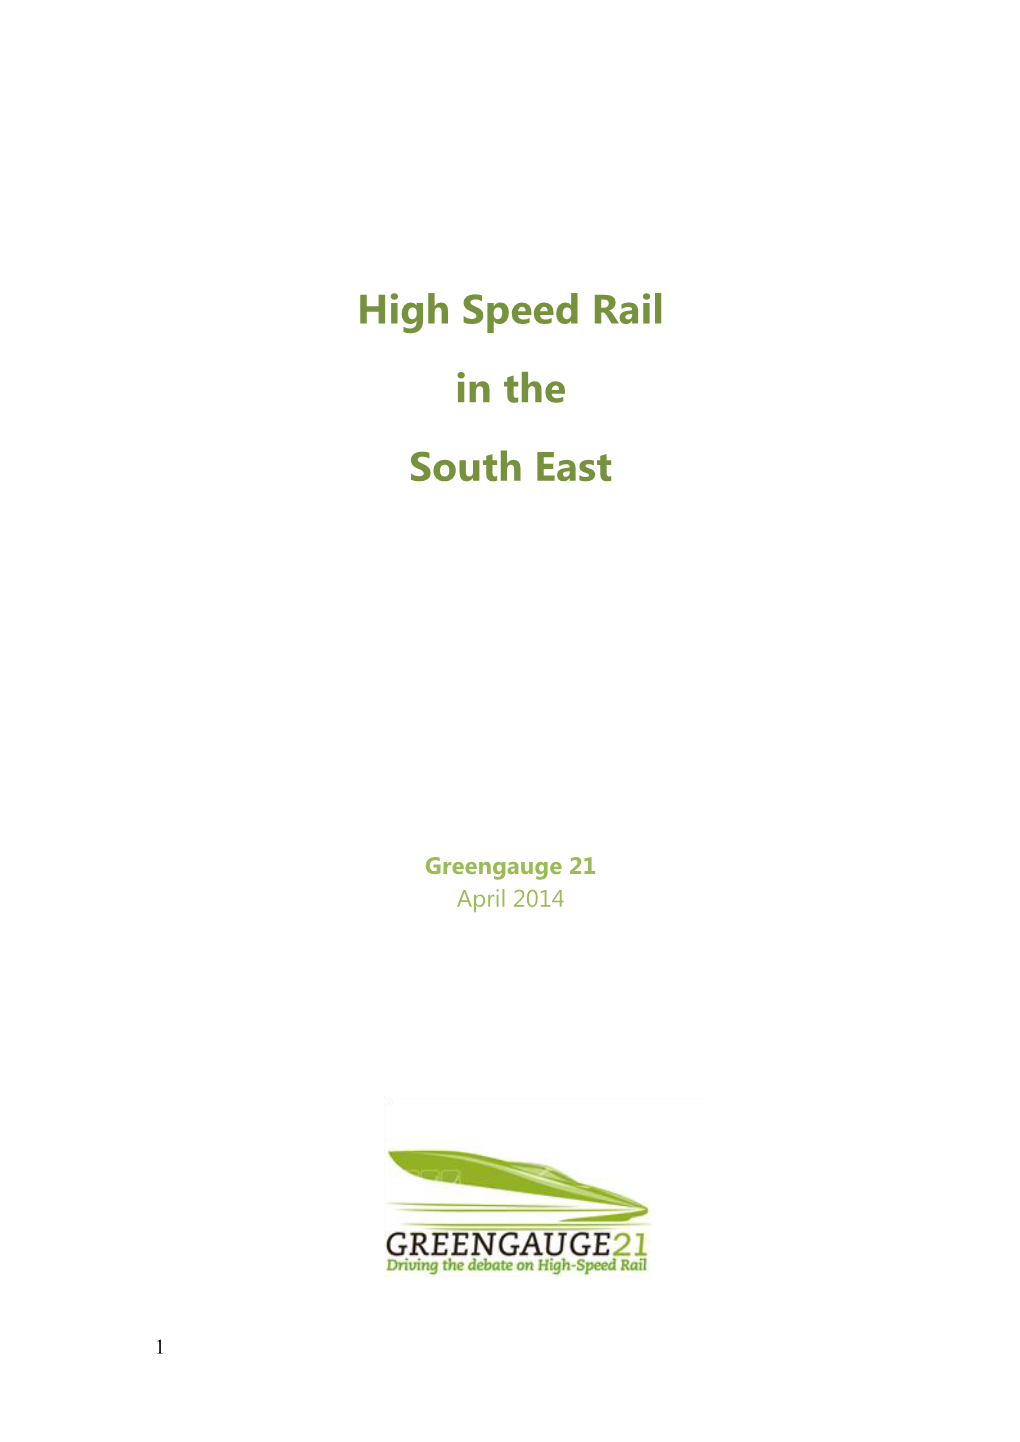 High Speed Rail in the South East